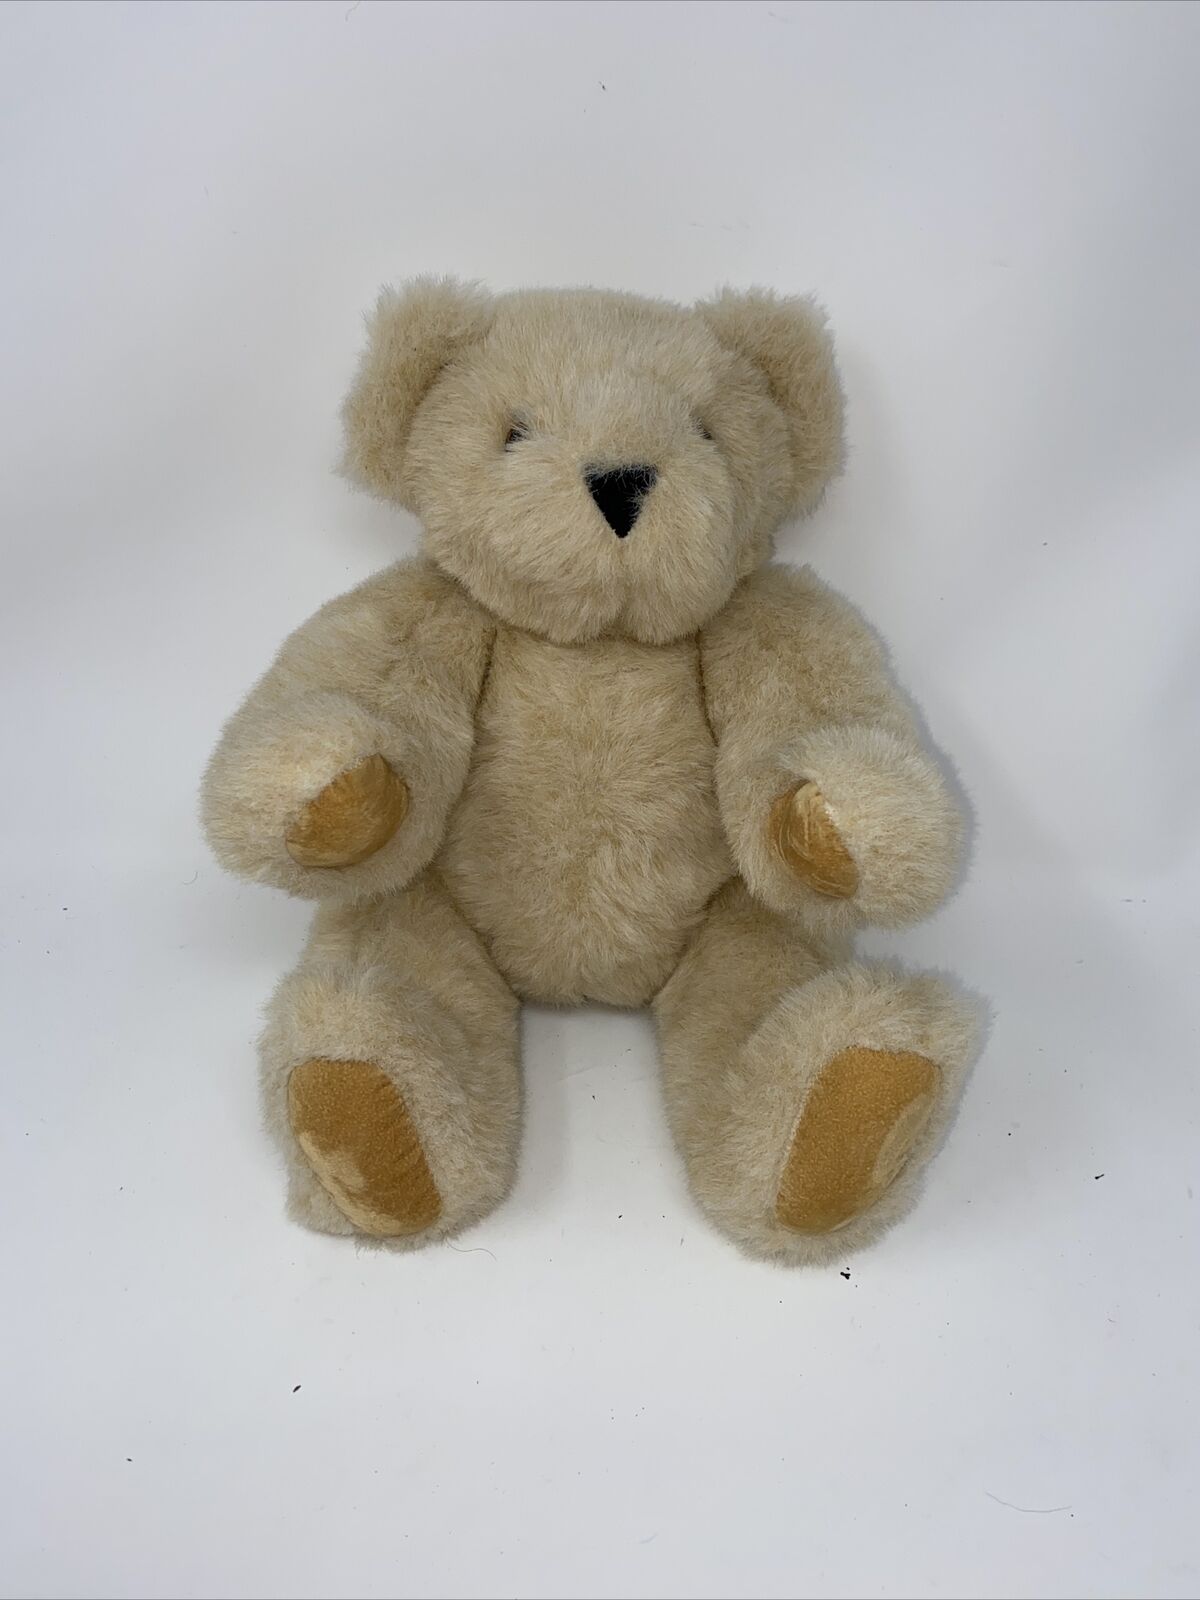 Authentic Vermont Teddy Bear Handmade in Vermont Cream Tan Paws Jointed